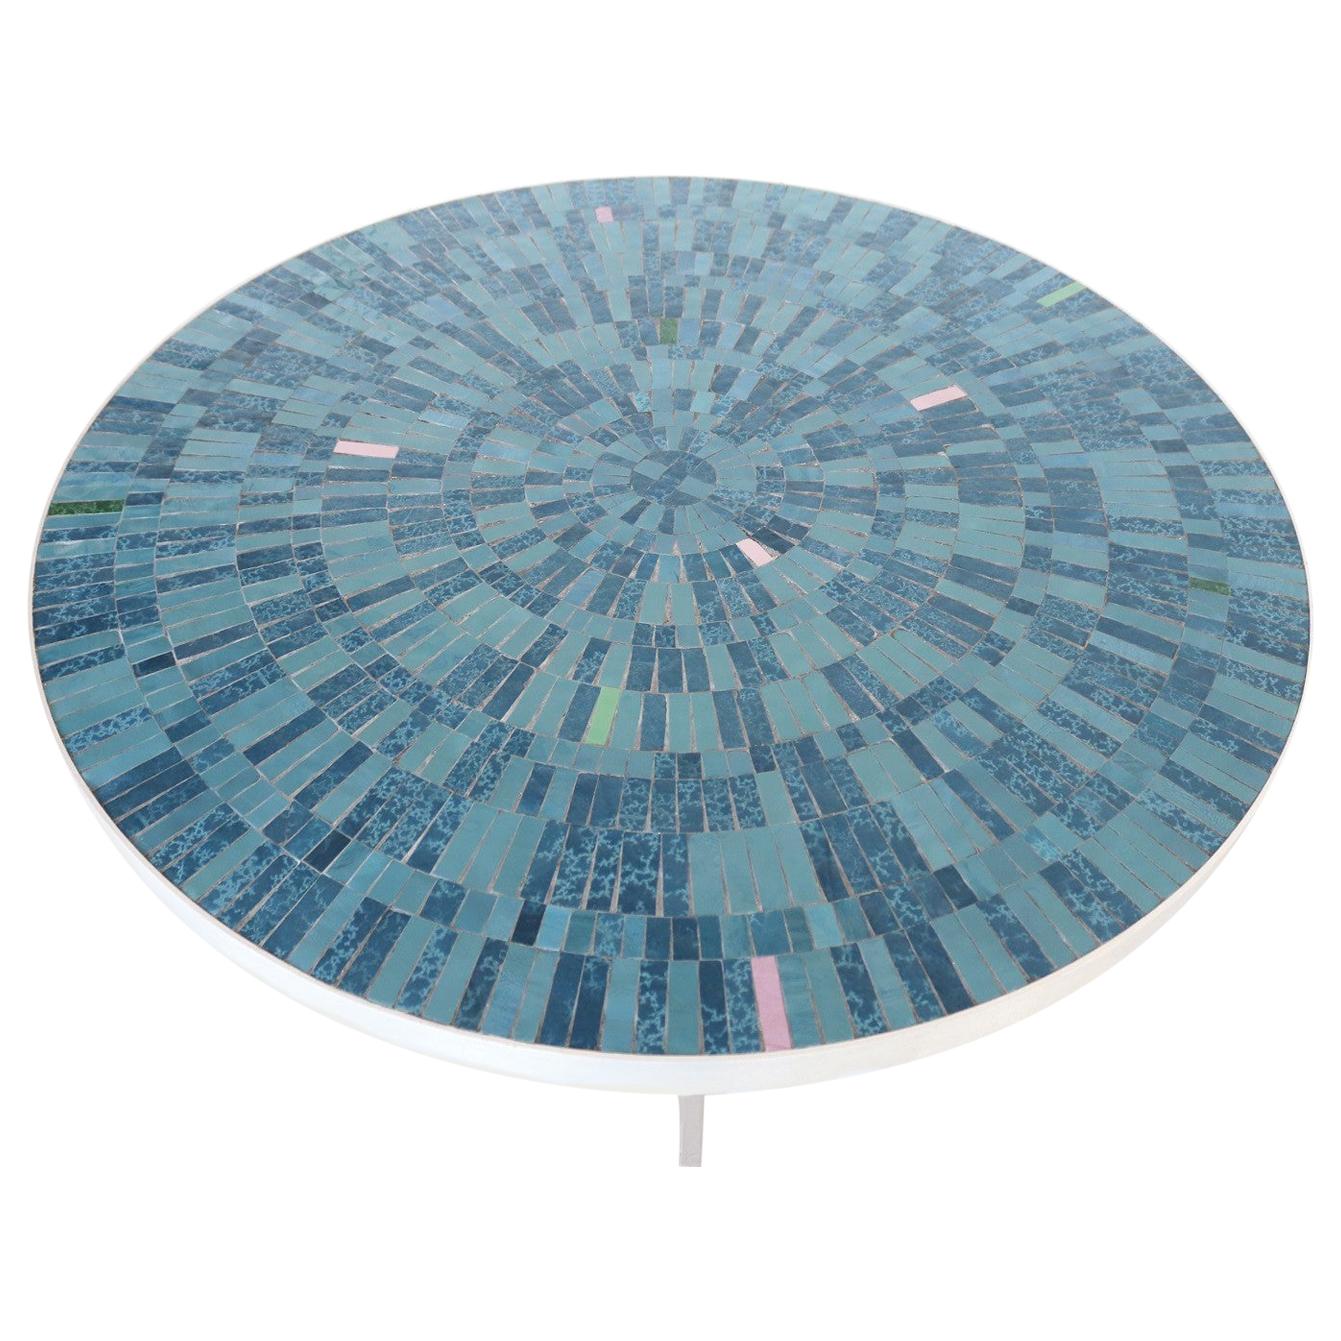 Midcentury Mosaic Tile and Steel Coffee Table by Berthold Muller, 1960